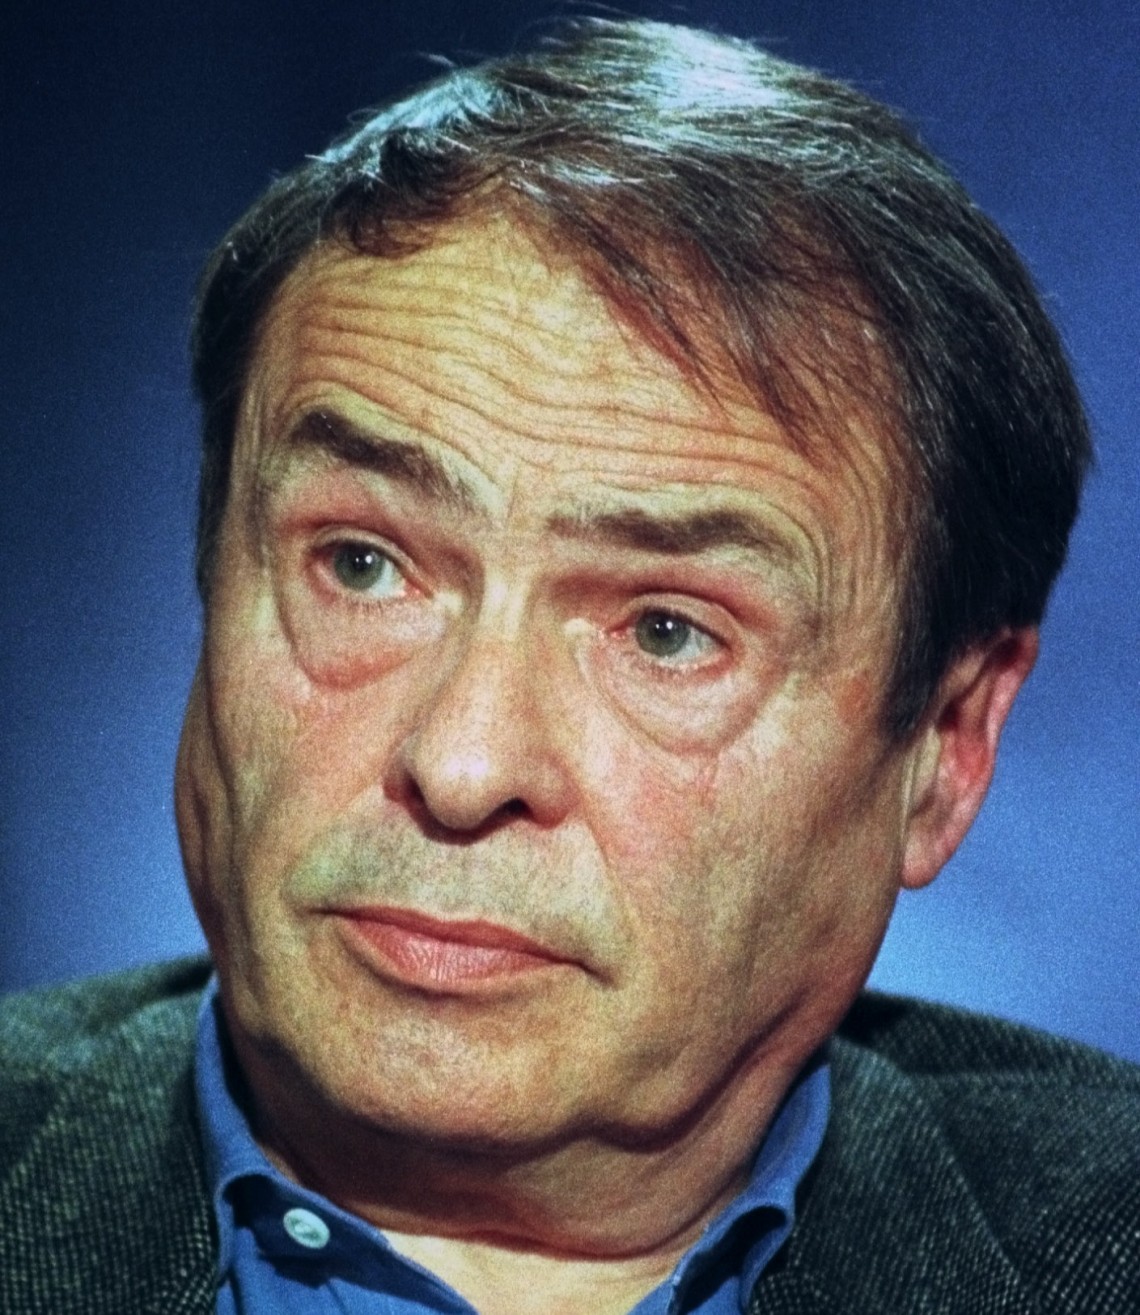 French philosopher and sociologist Pierre Bourdieu ponders a question during a conference in Paris in this Oct. 7, 1998 photo. Bourdieu died of cancer at a Paris hospital on Thursday, Jan. 24, 2002. He was 71. (AP Photo/Remy de la Mauviniere)